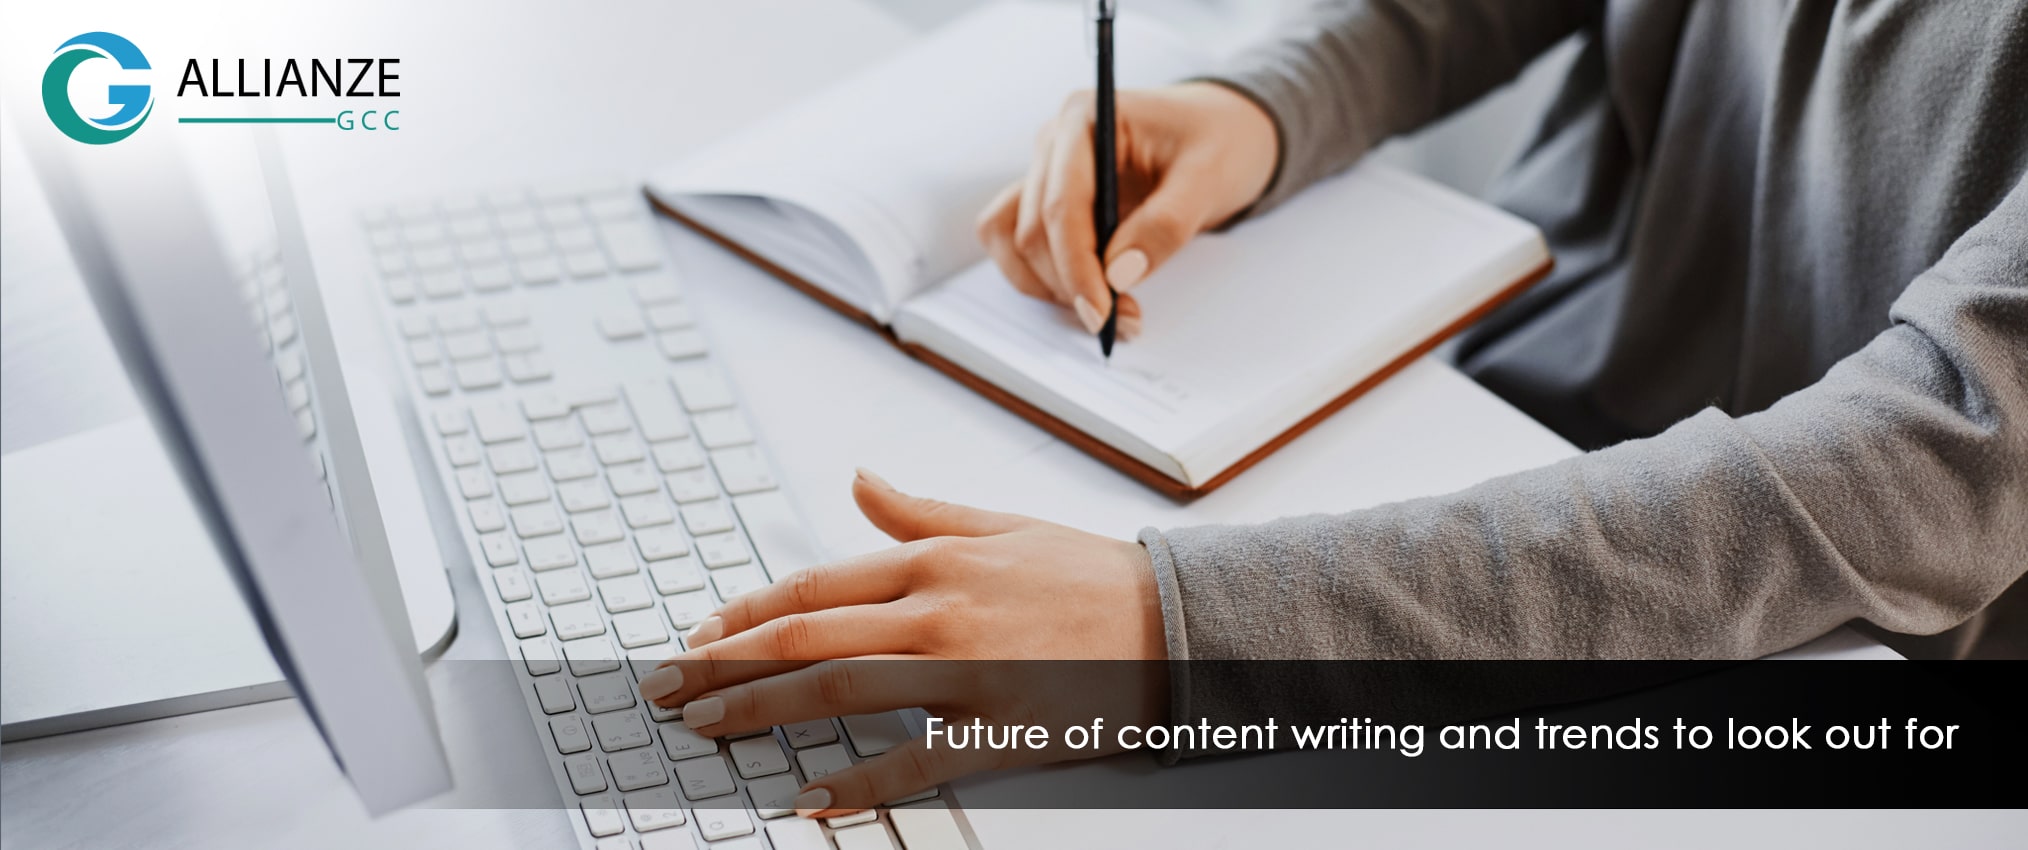 Future of content writing and trends to look out for